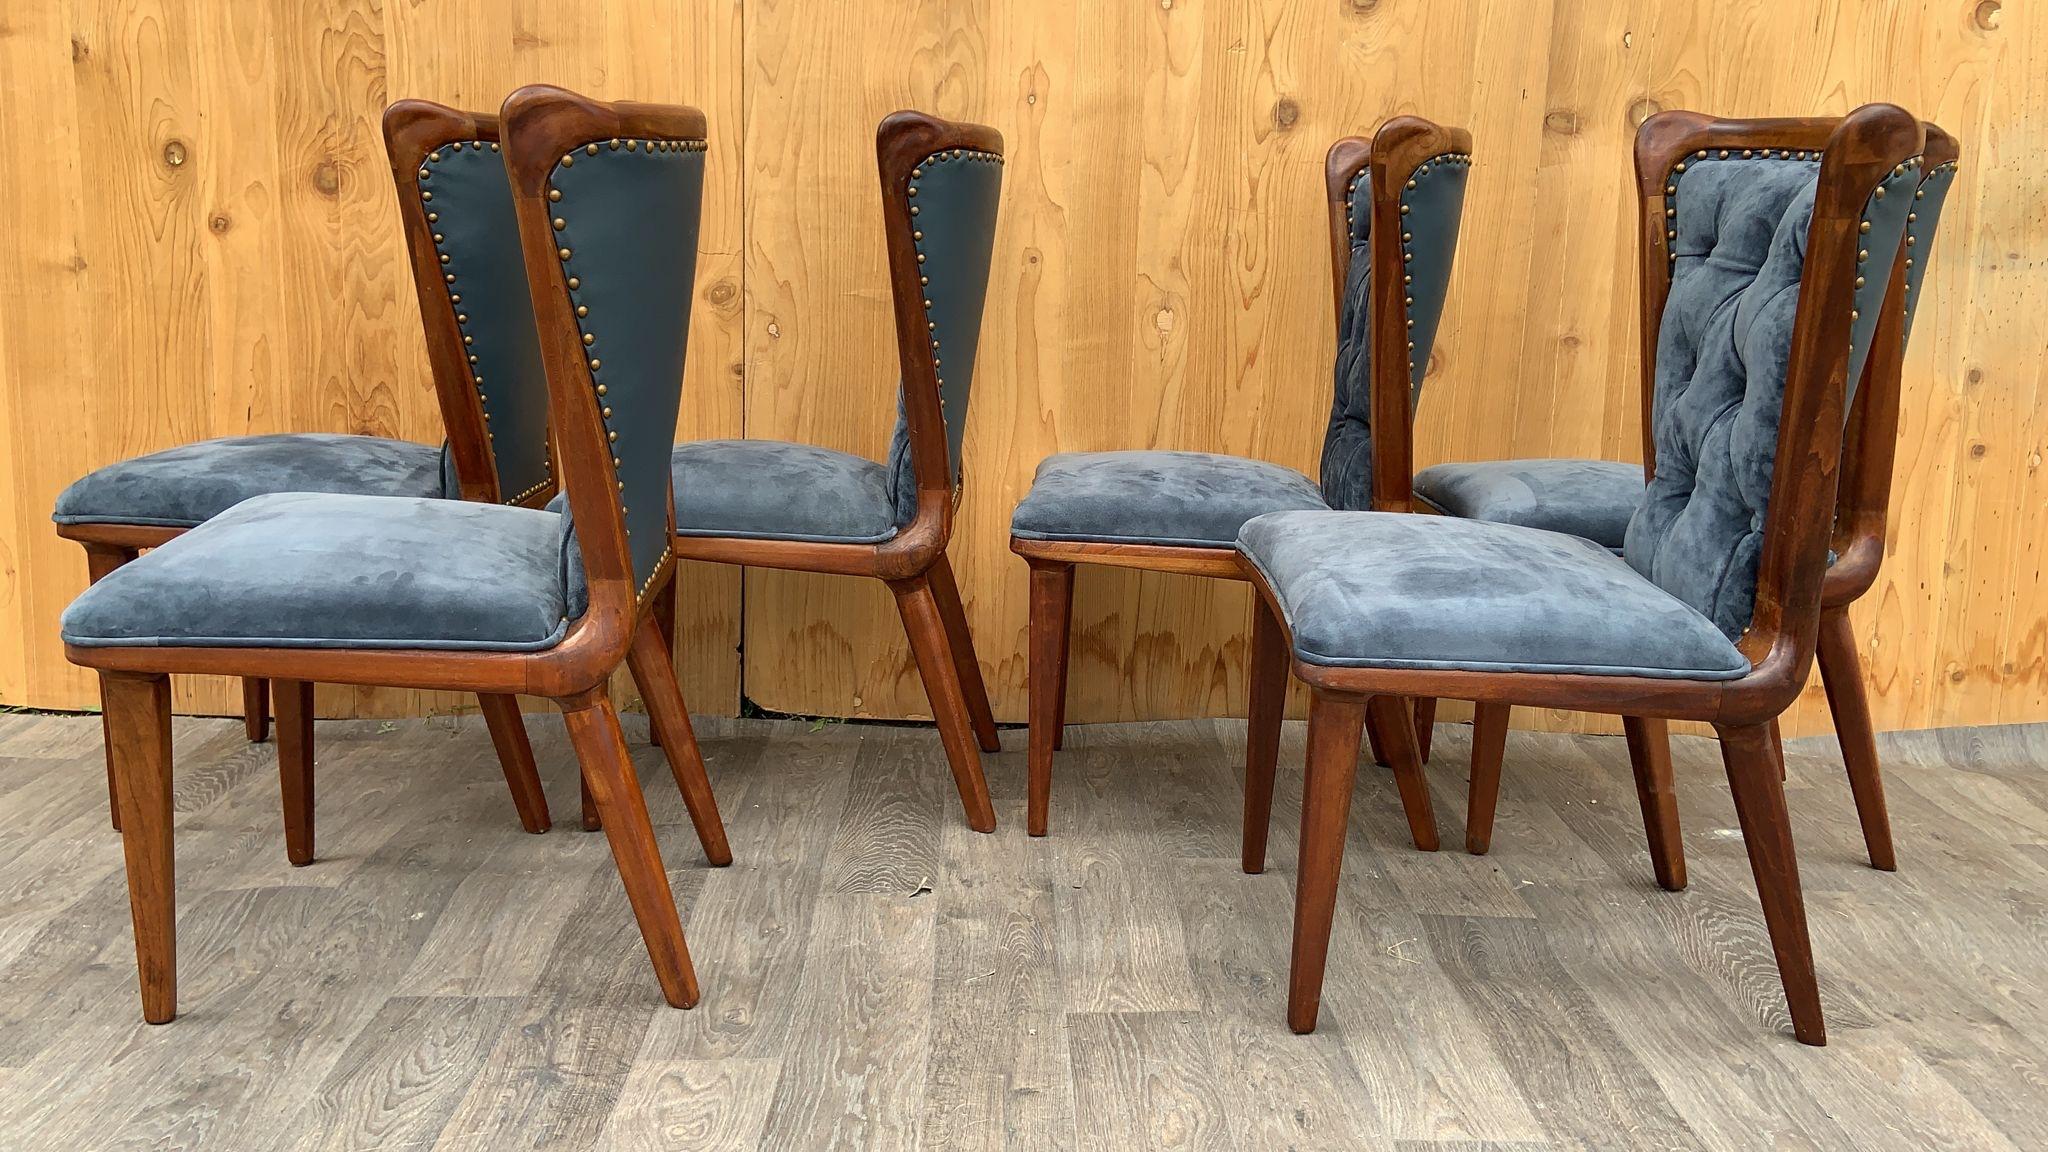 Art Deco Suede Sculptural Curved Back Dining Chairs Newly Upholstered - Set of 6 In Good Condition For Sale In Chicago, IL